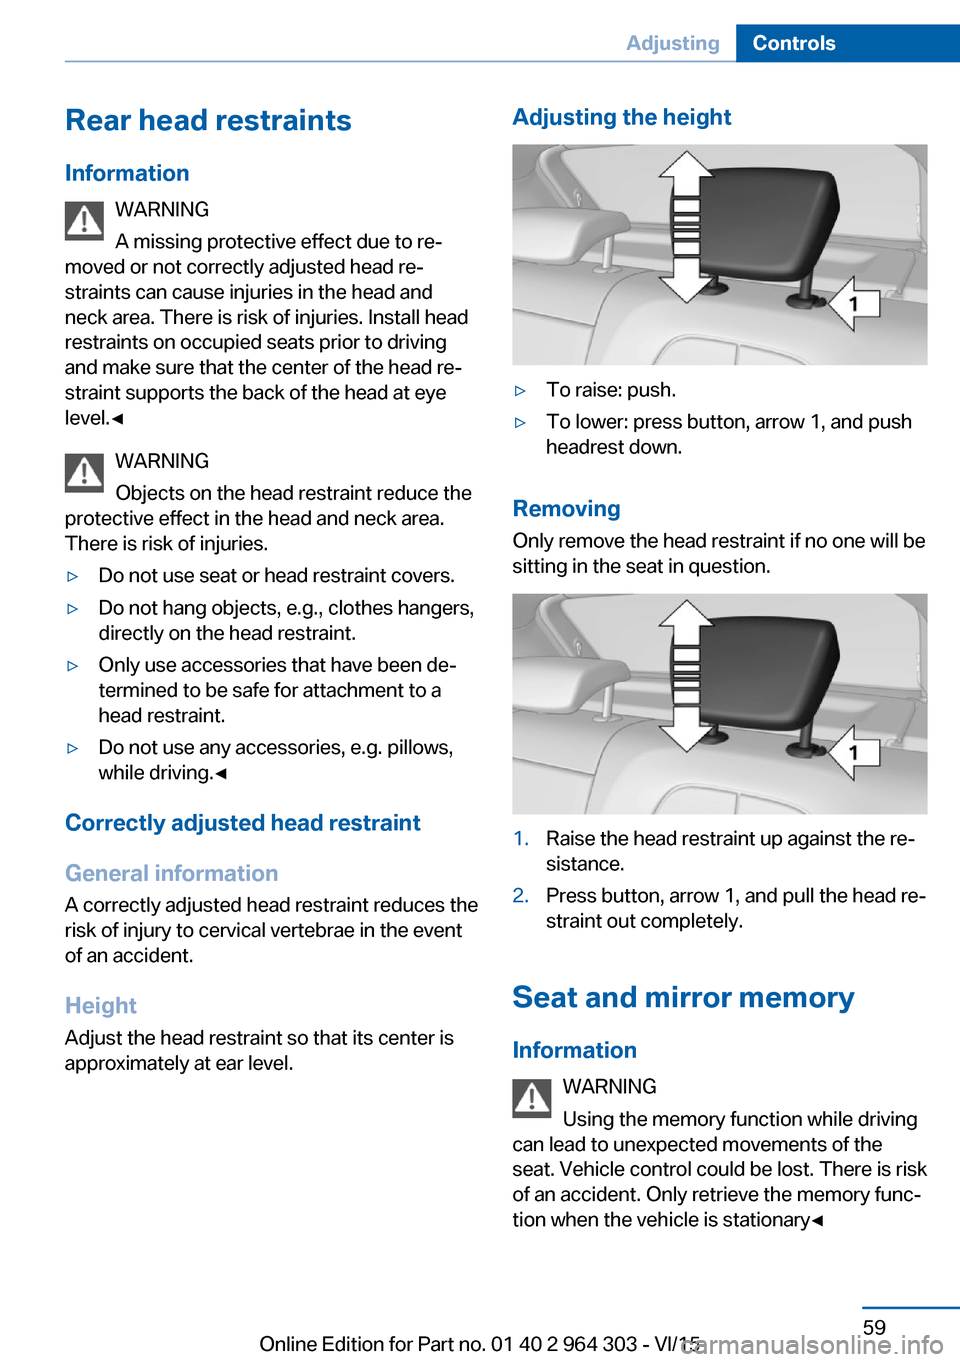 BMW X1 2016 F48 Owners Manual Rear head restraints
Information WARNING
A missing protective effect due to re‐
moved or not correctly adjusted head re‐
straints can cause injuries in the head and
neck area. There is risk of inj